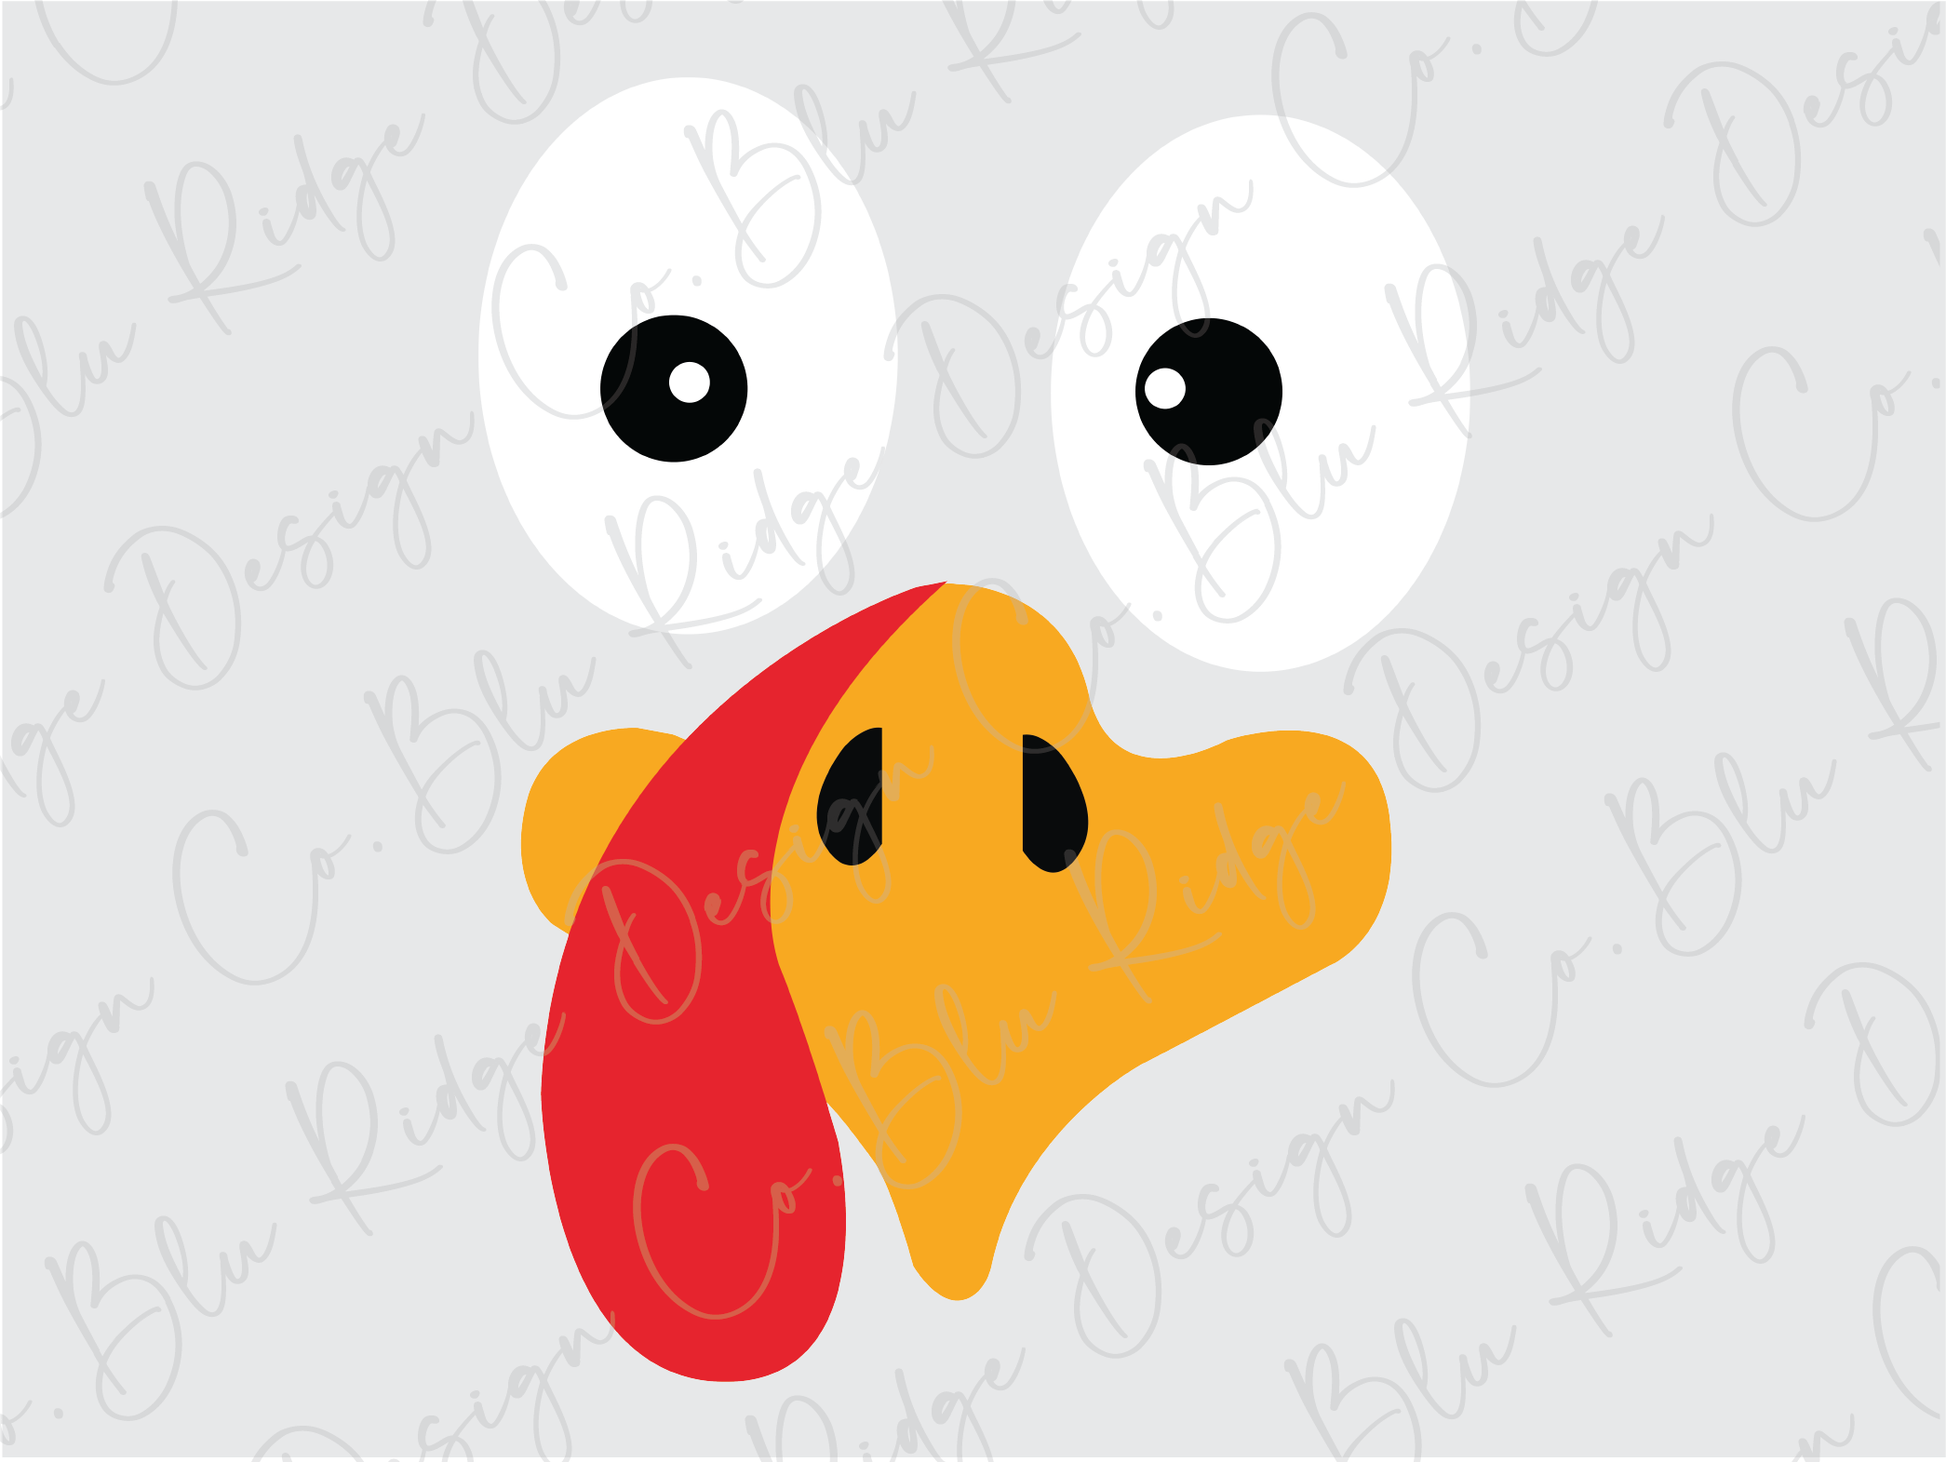 a yellow and red bird with big eyes